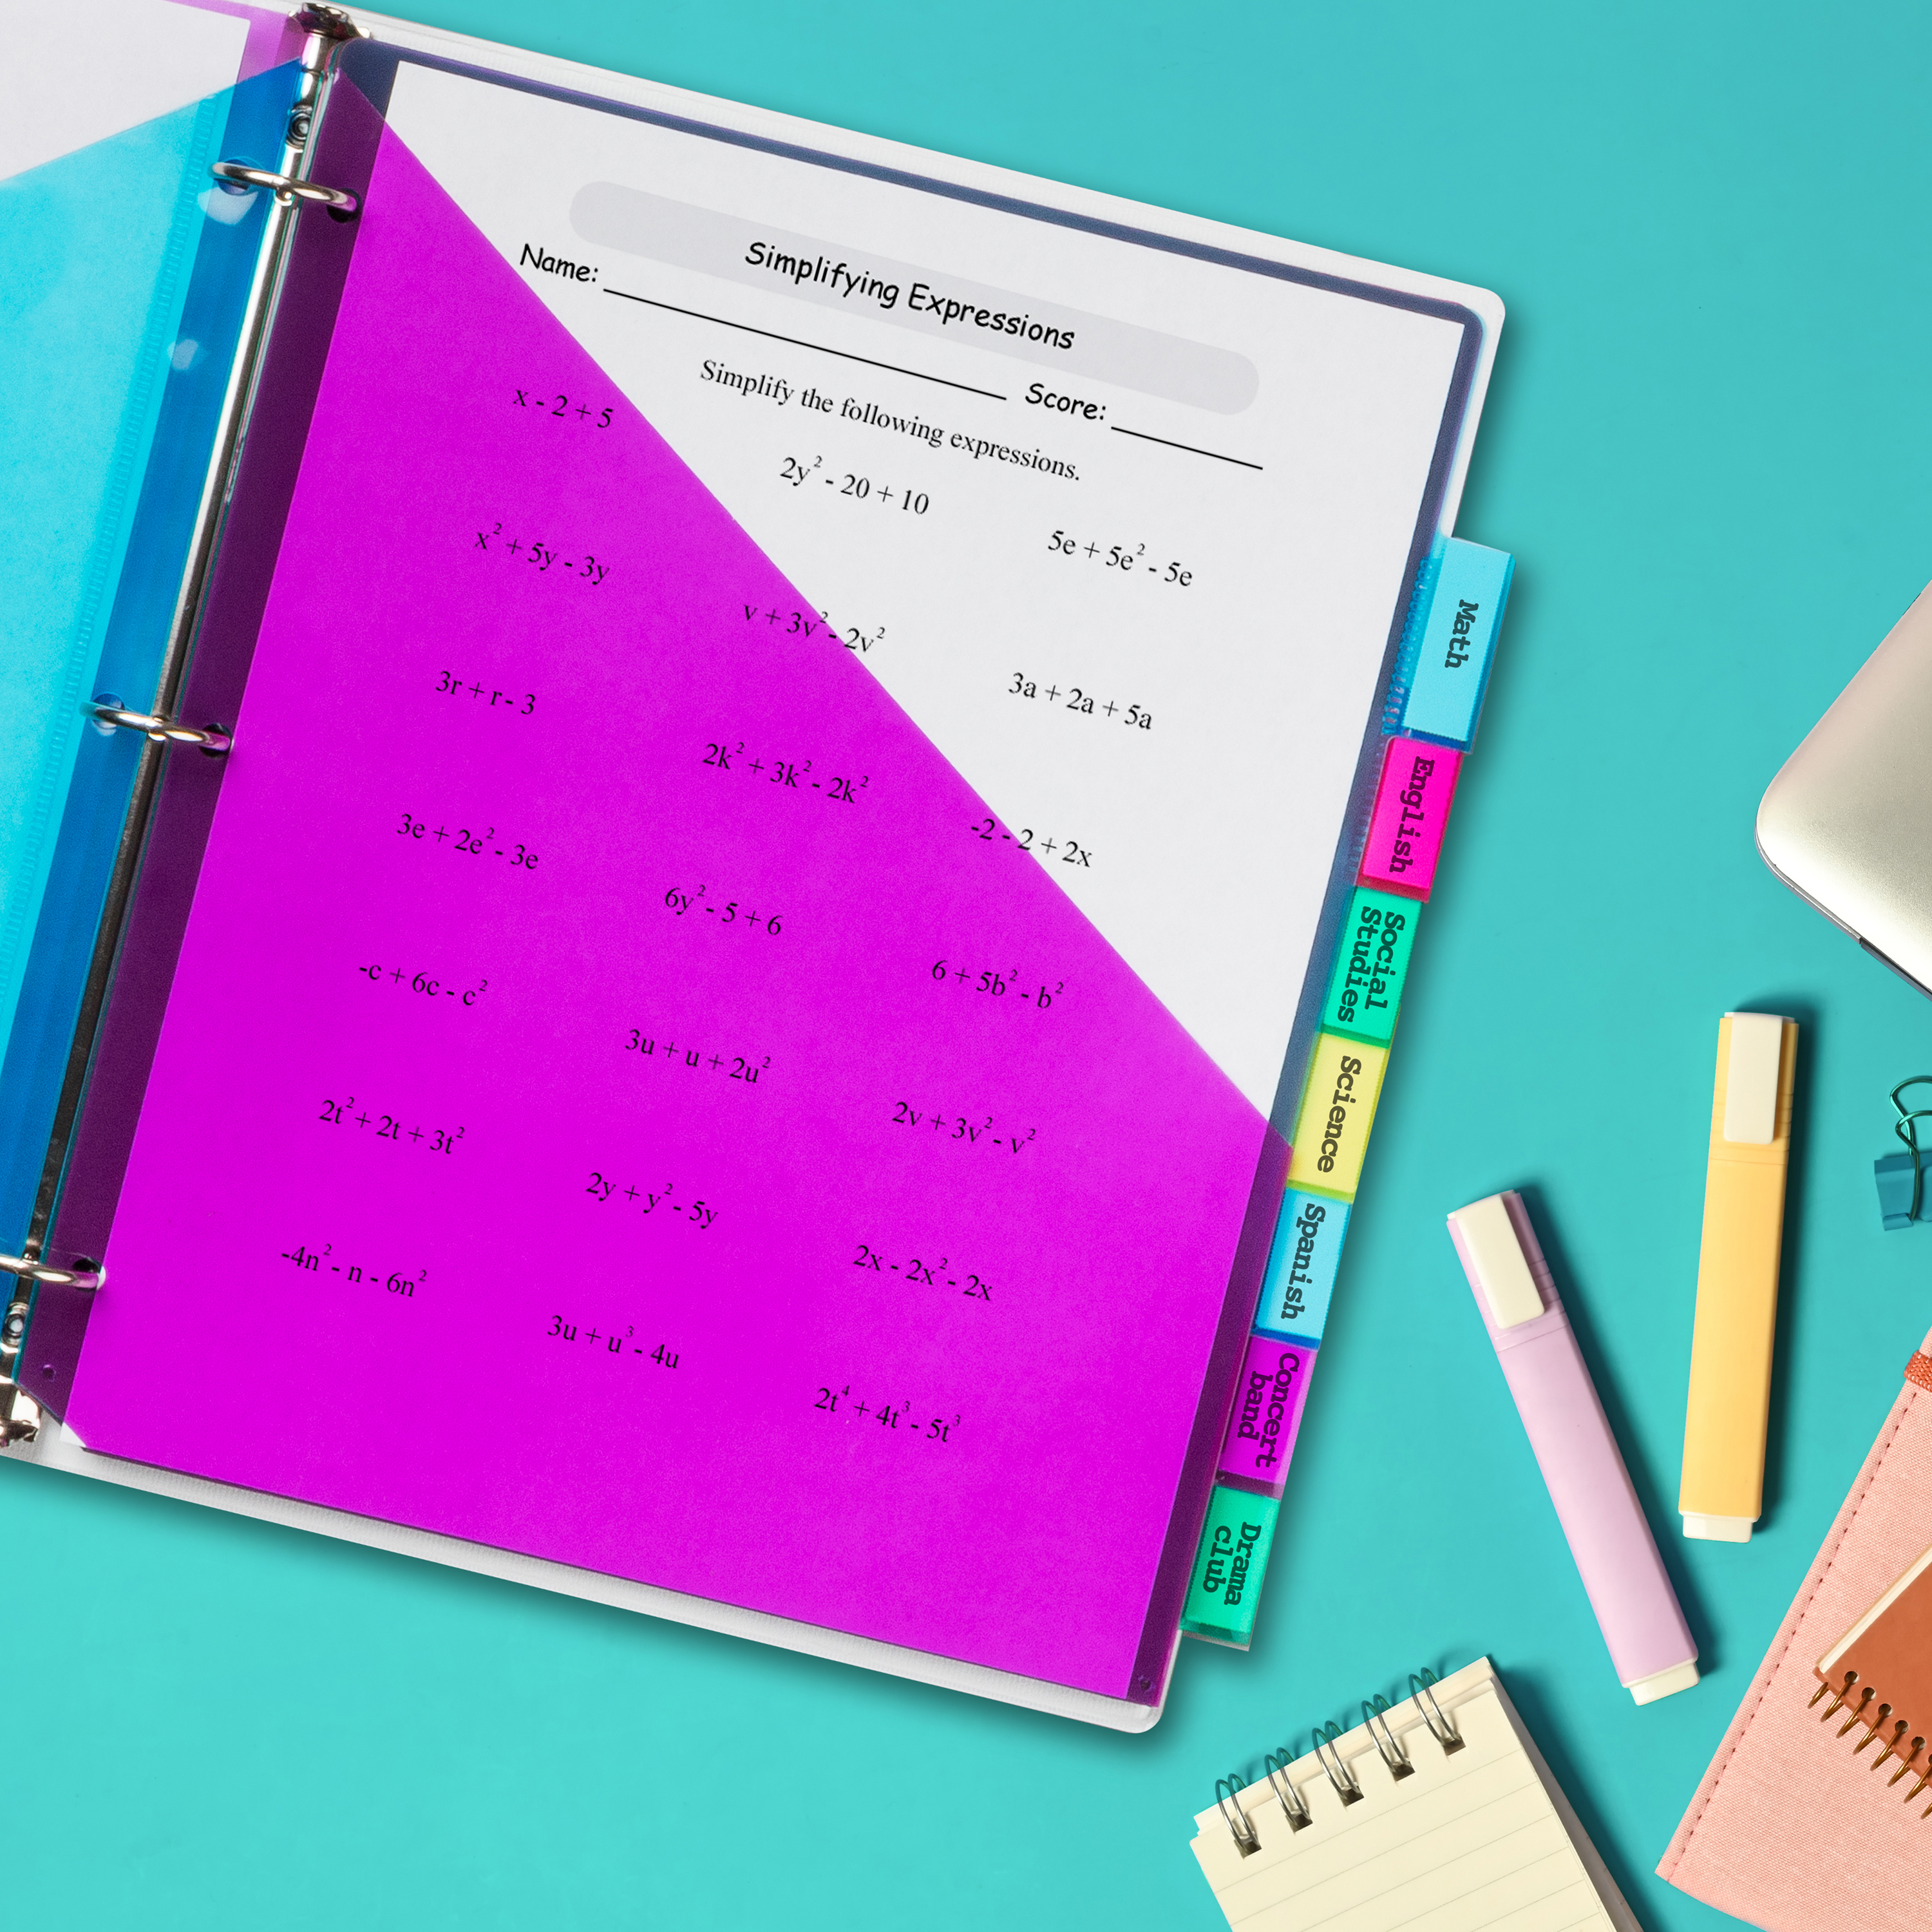 A top-down image of an open binder on a teal blue desk. The binder is surrounded by back-to-school supplies. Inside the binder are colorful Avery 11989 pocket dividers. 